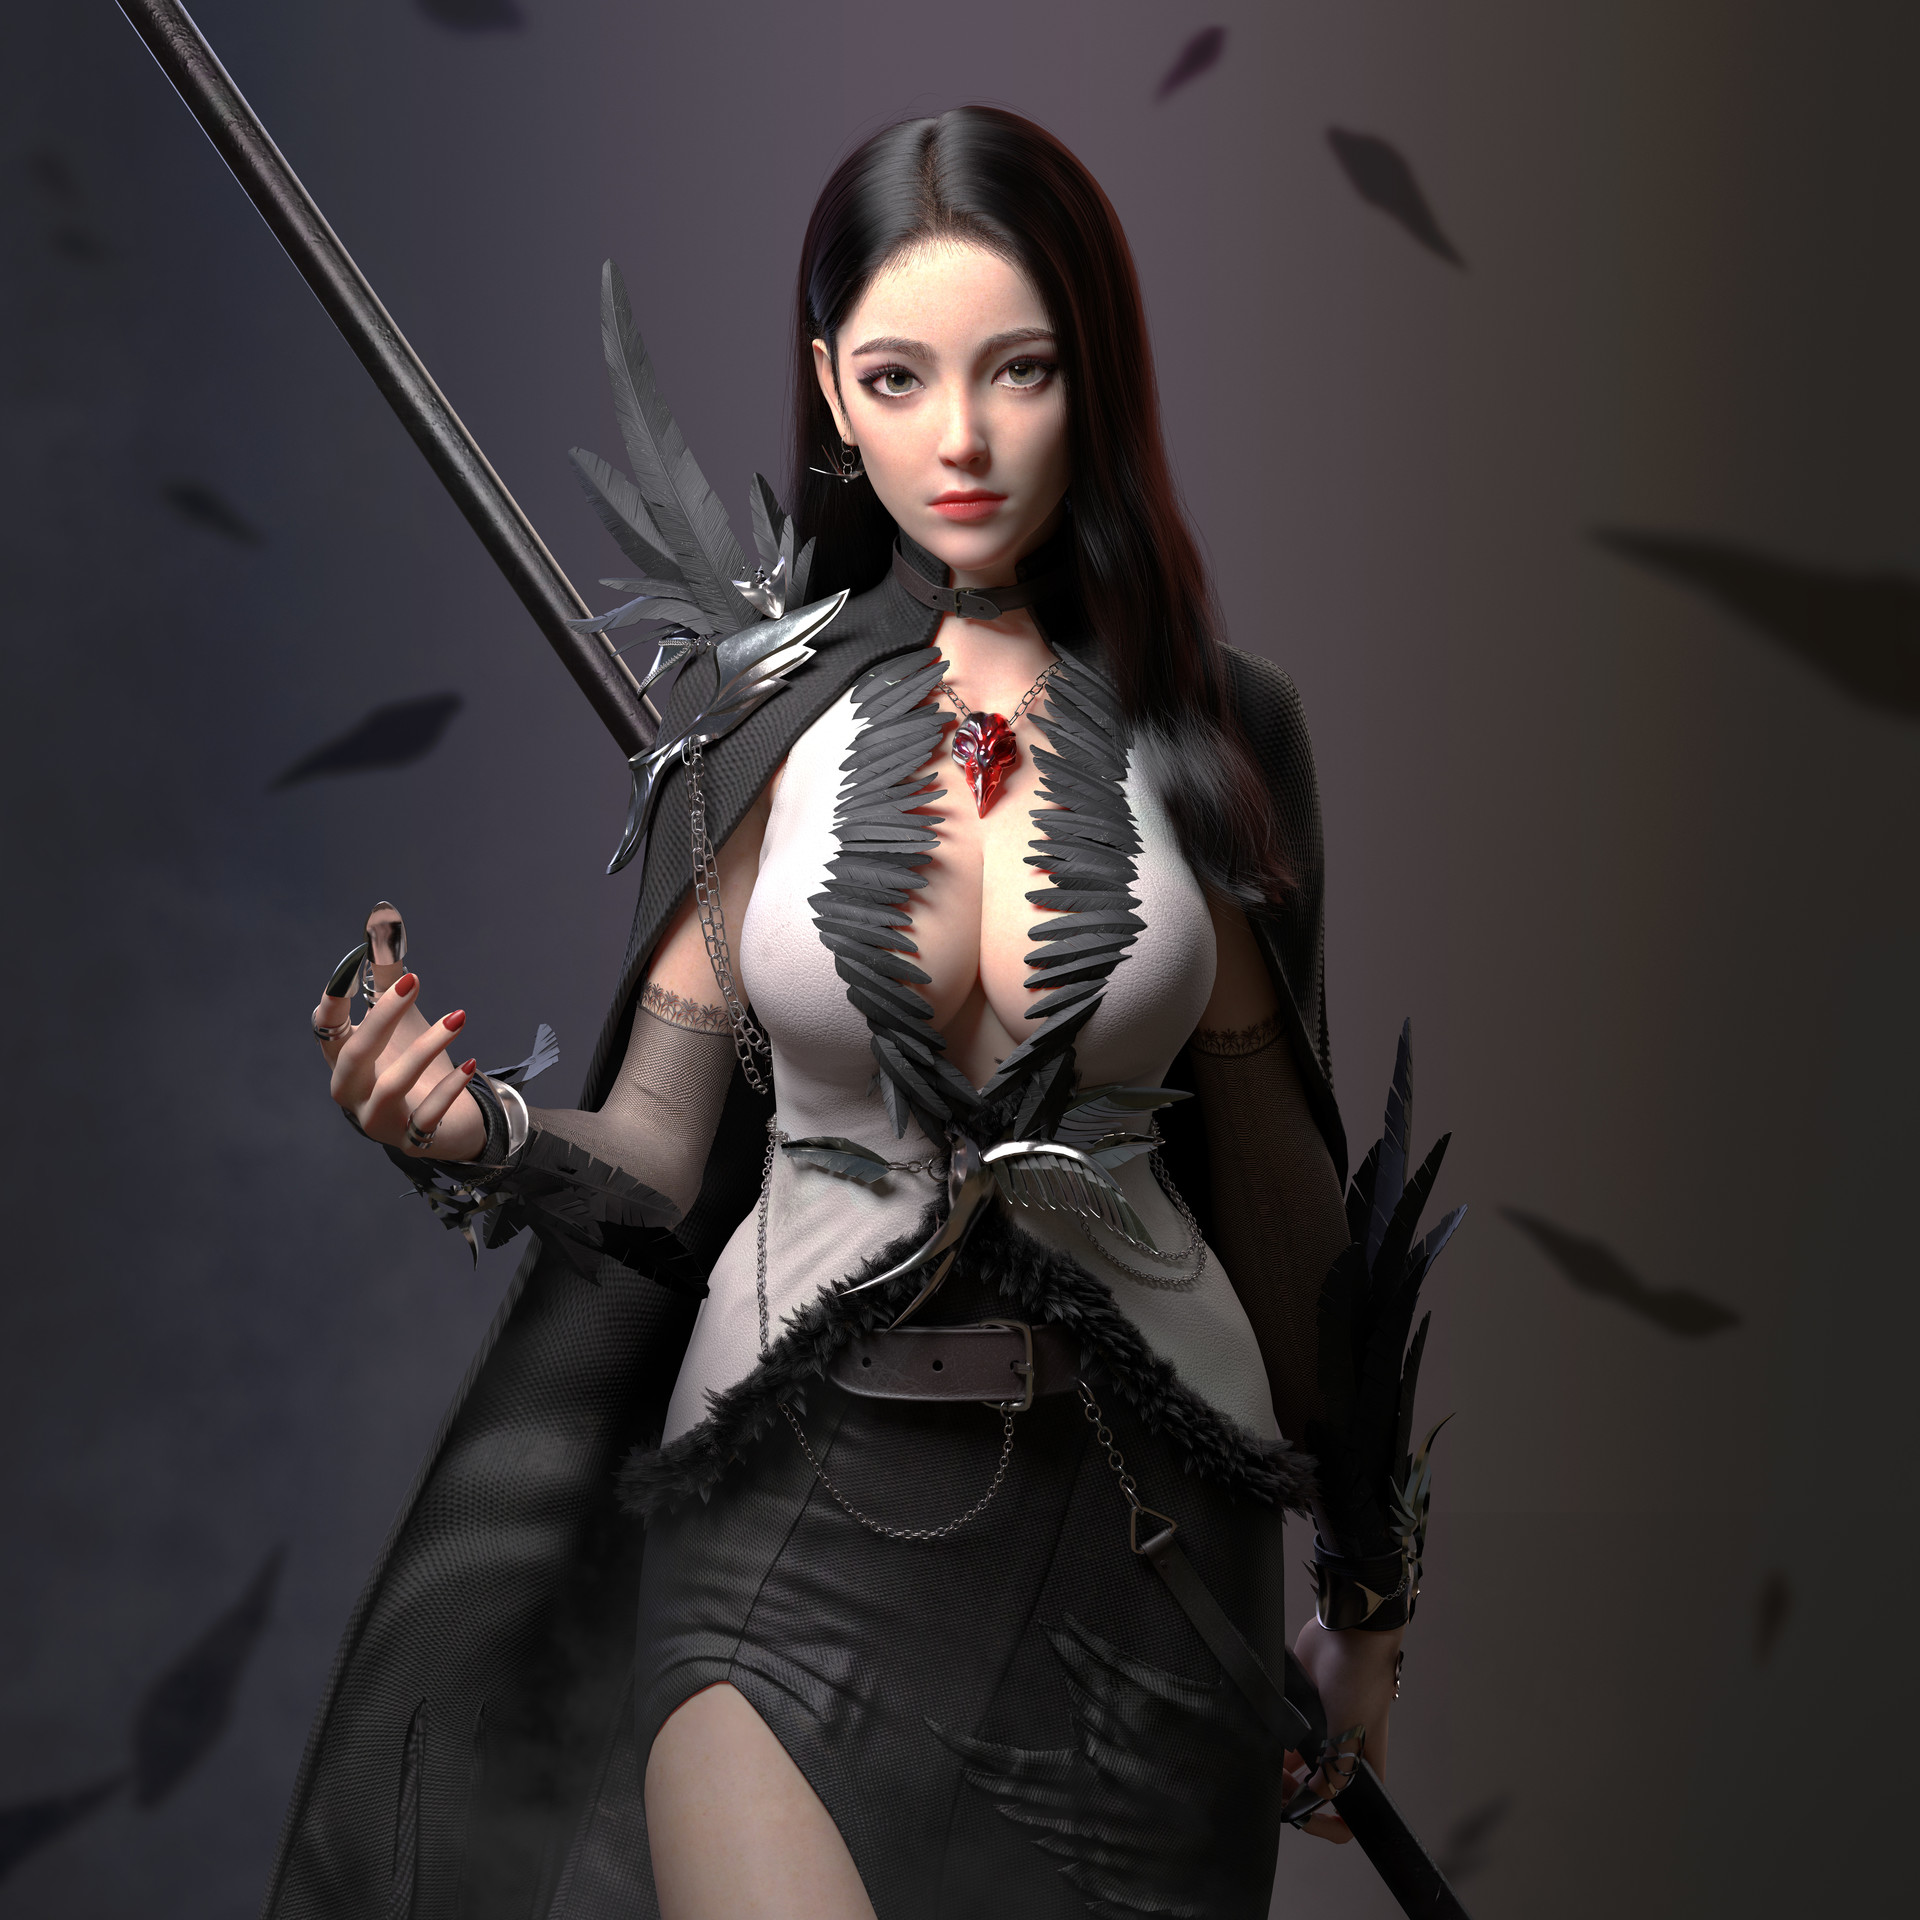 General 1920x1920 Cifangyi women dark hair dress black clothing painted nails necklace weapon feathers CGI